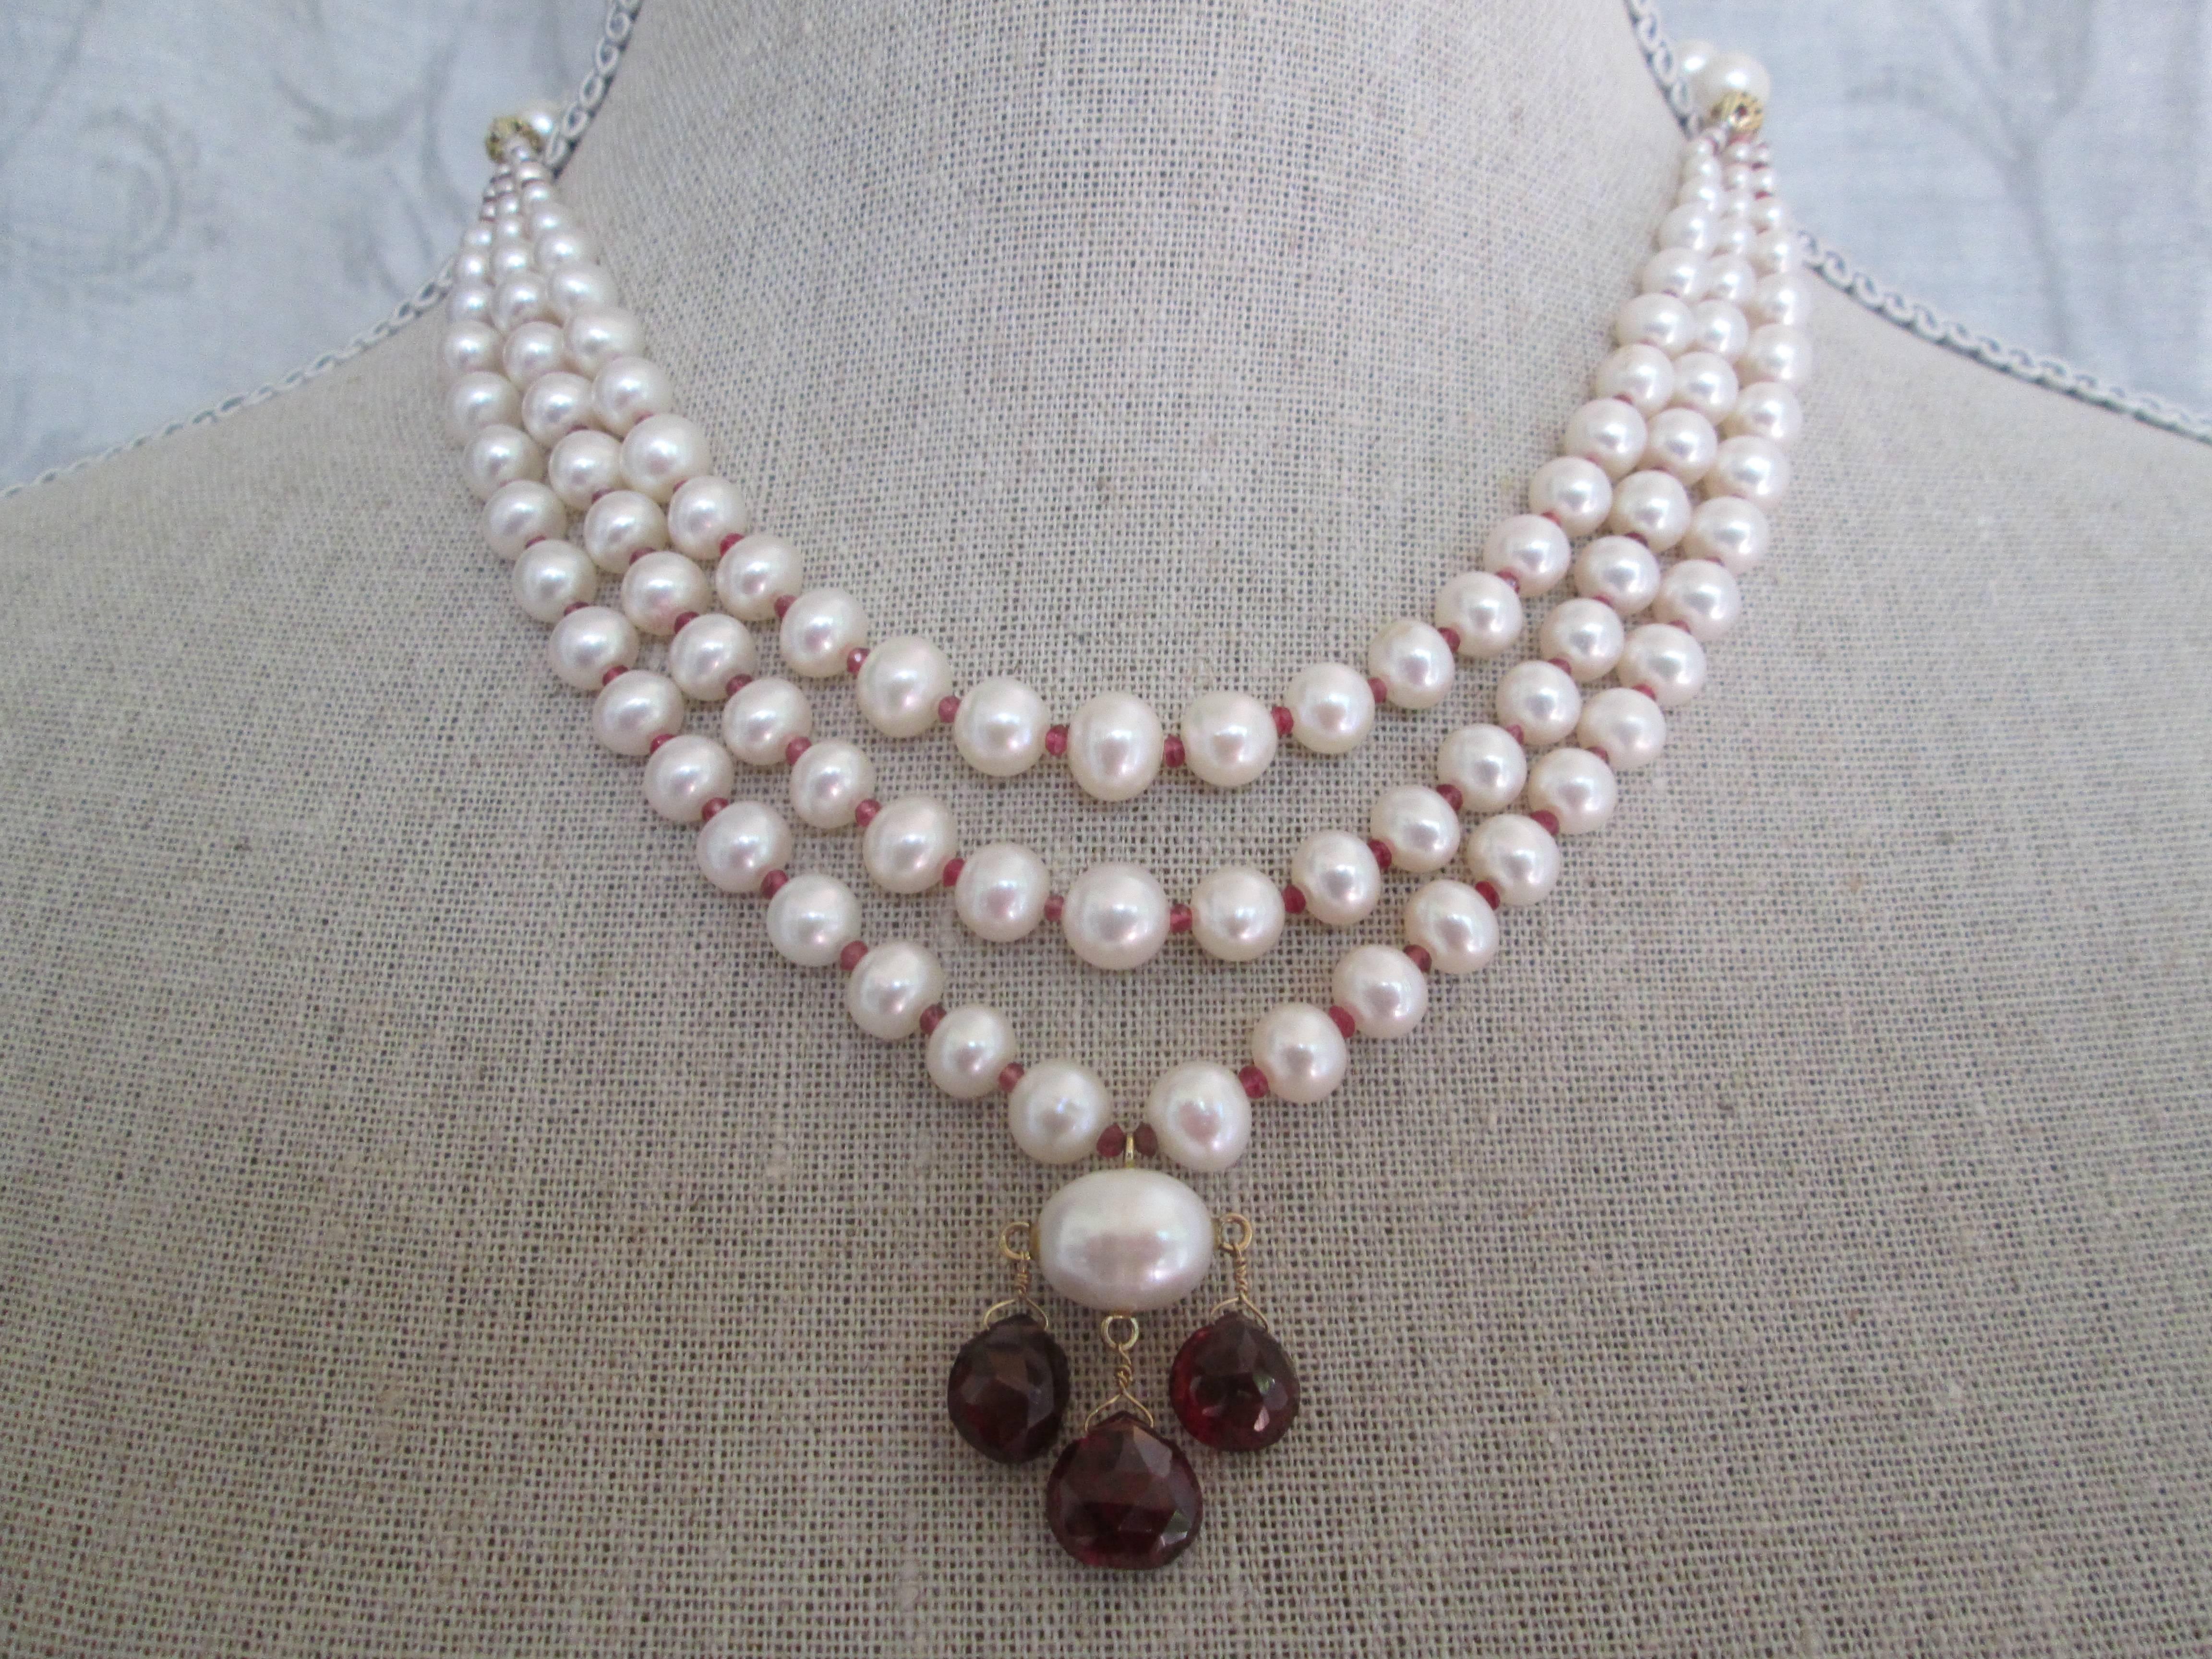 Marina J. 3 Strands of Graduated Pearl Necklace with Garnet & 14k Yellow Gold 1